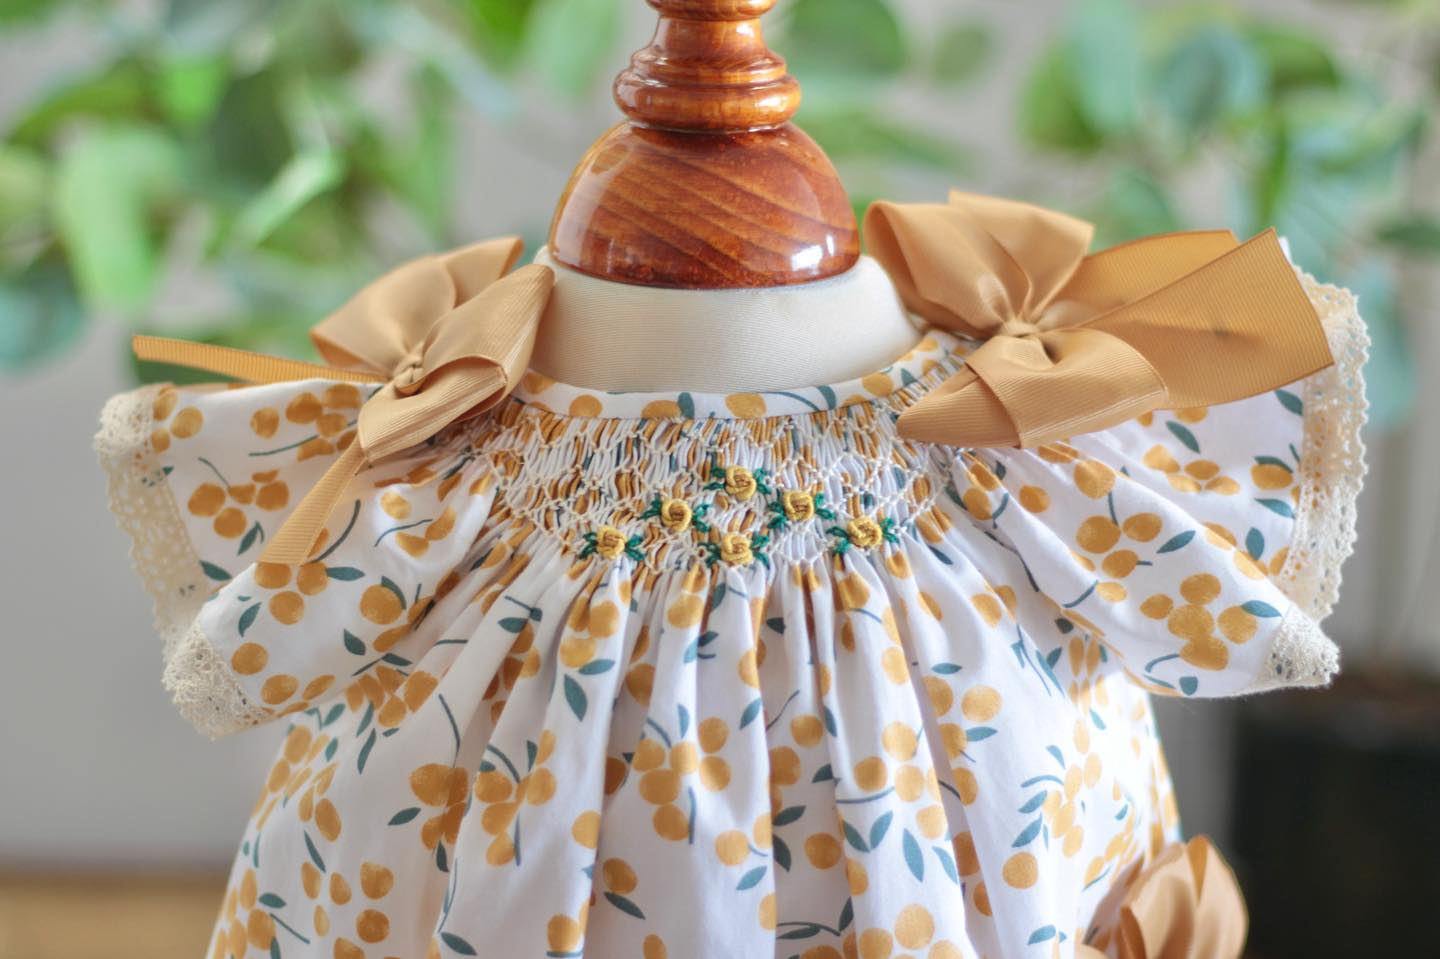 Handmade Dress with flowers and mustard bows